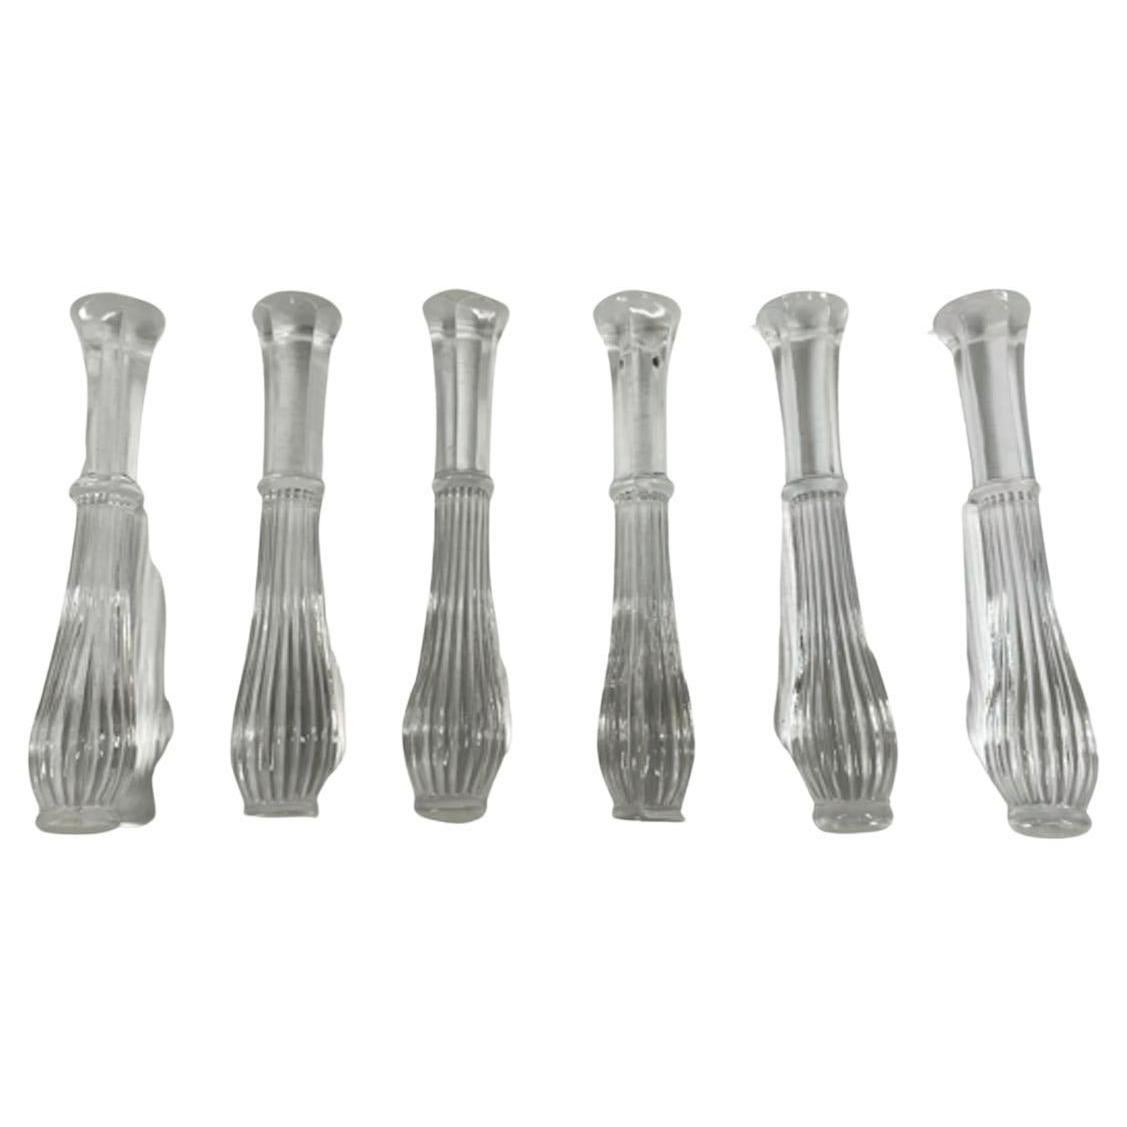 Six Art Deco colorless glass muddlers of baluster form with a reeded top with disk finial above a ring with six-sided lower section ending in a frosted foot.